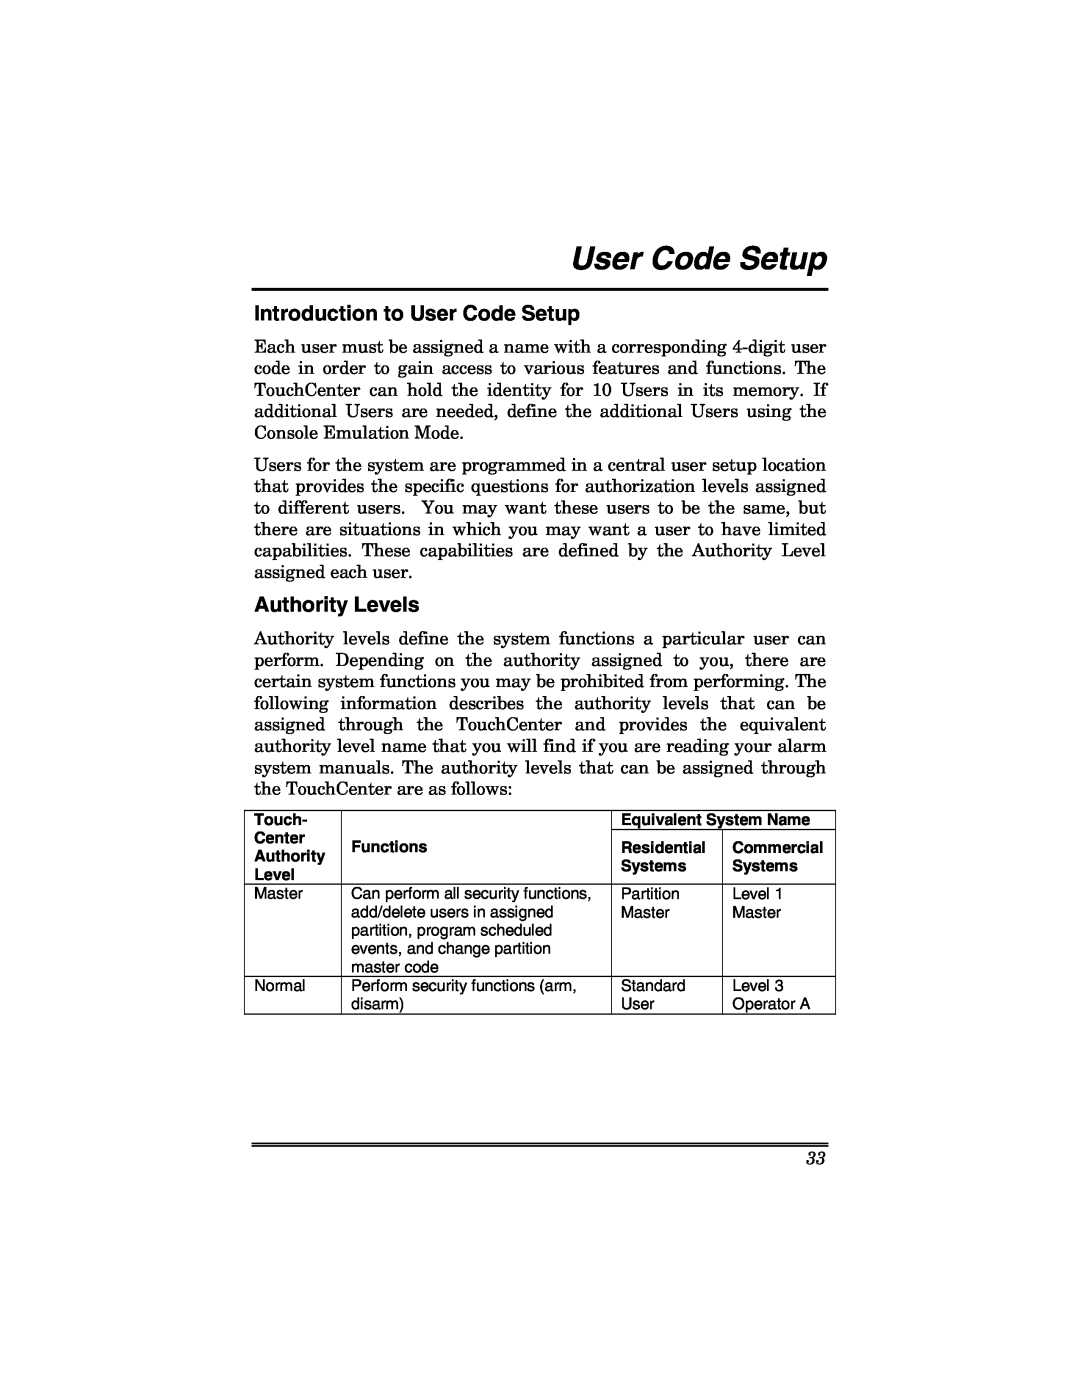 Honeywell 6271 manual Introduction to User Code Setup, Authority Levels 